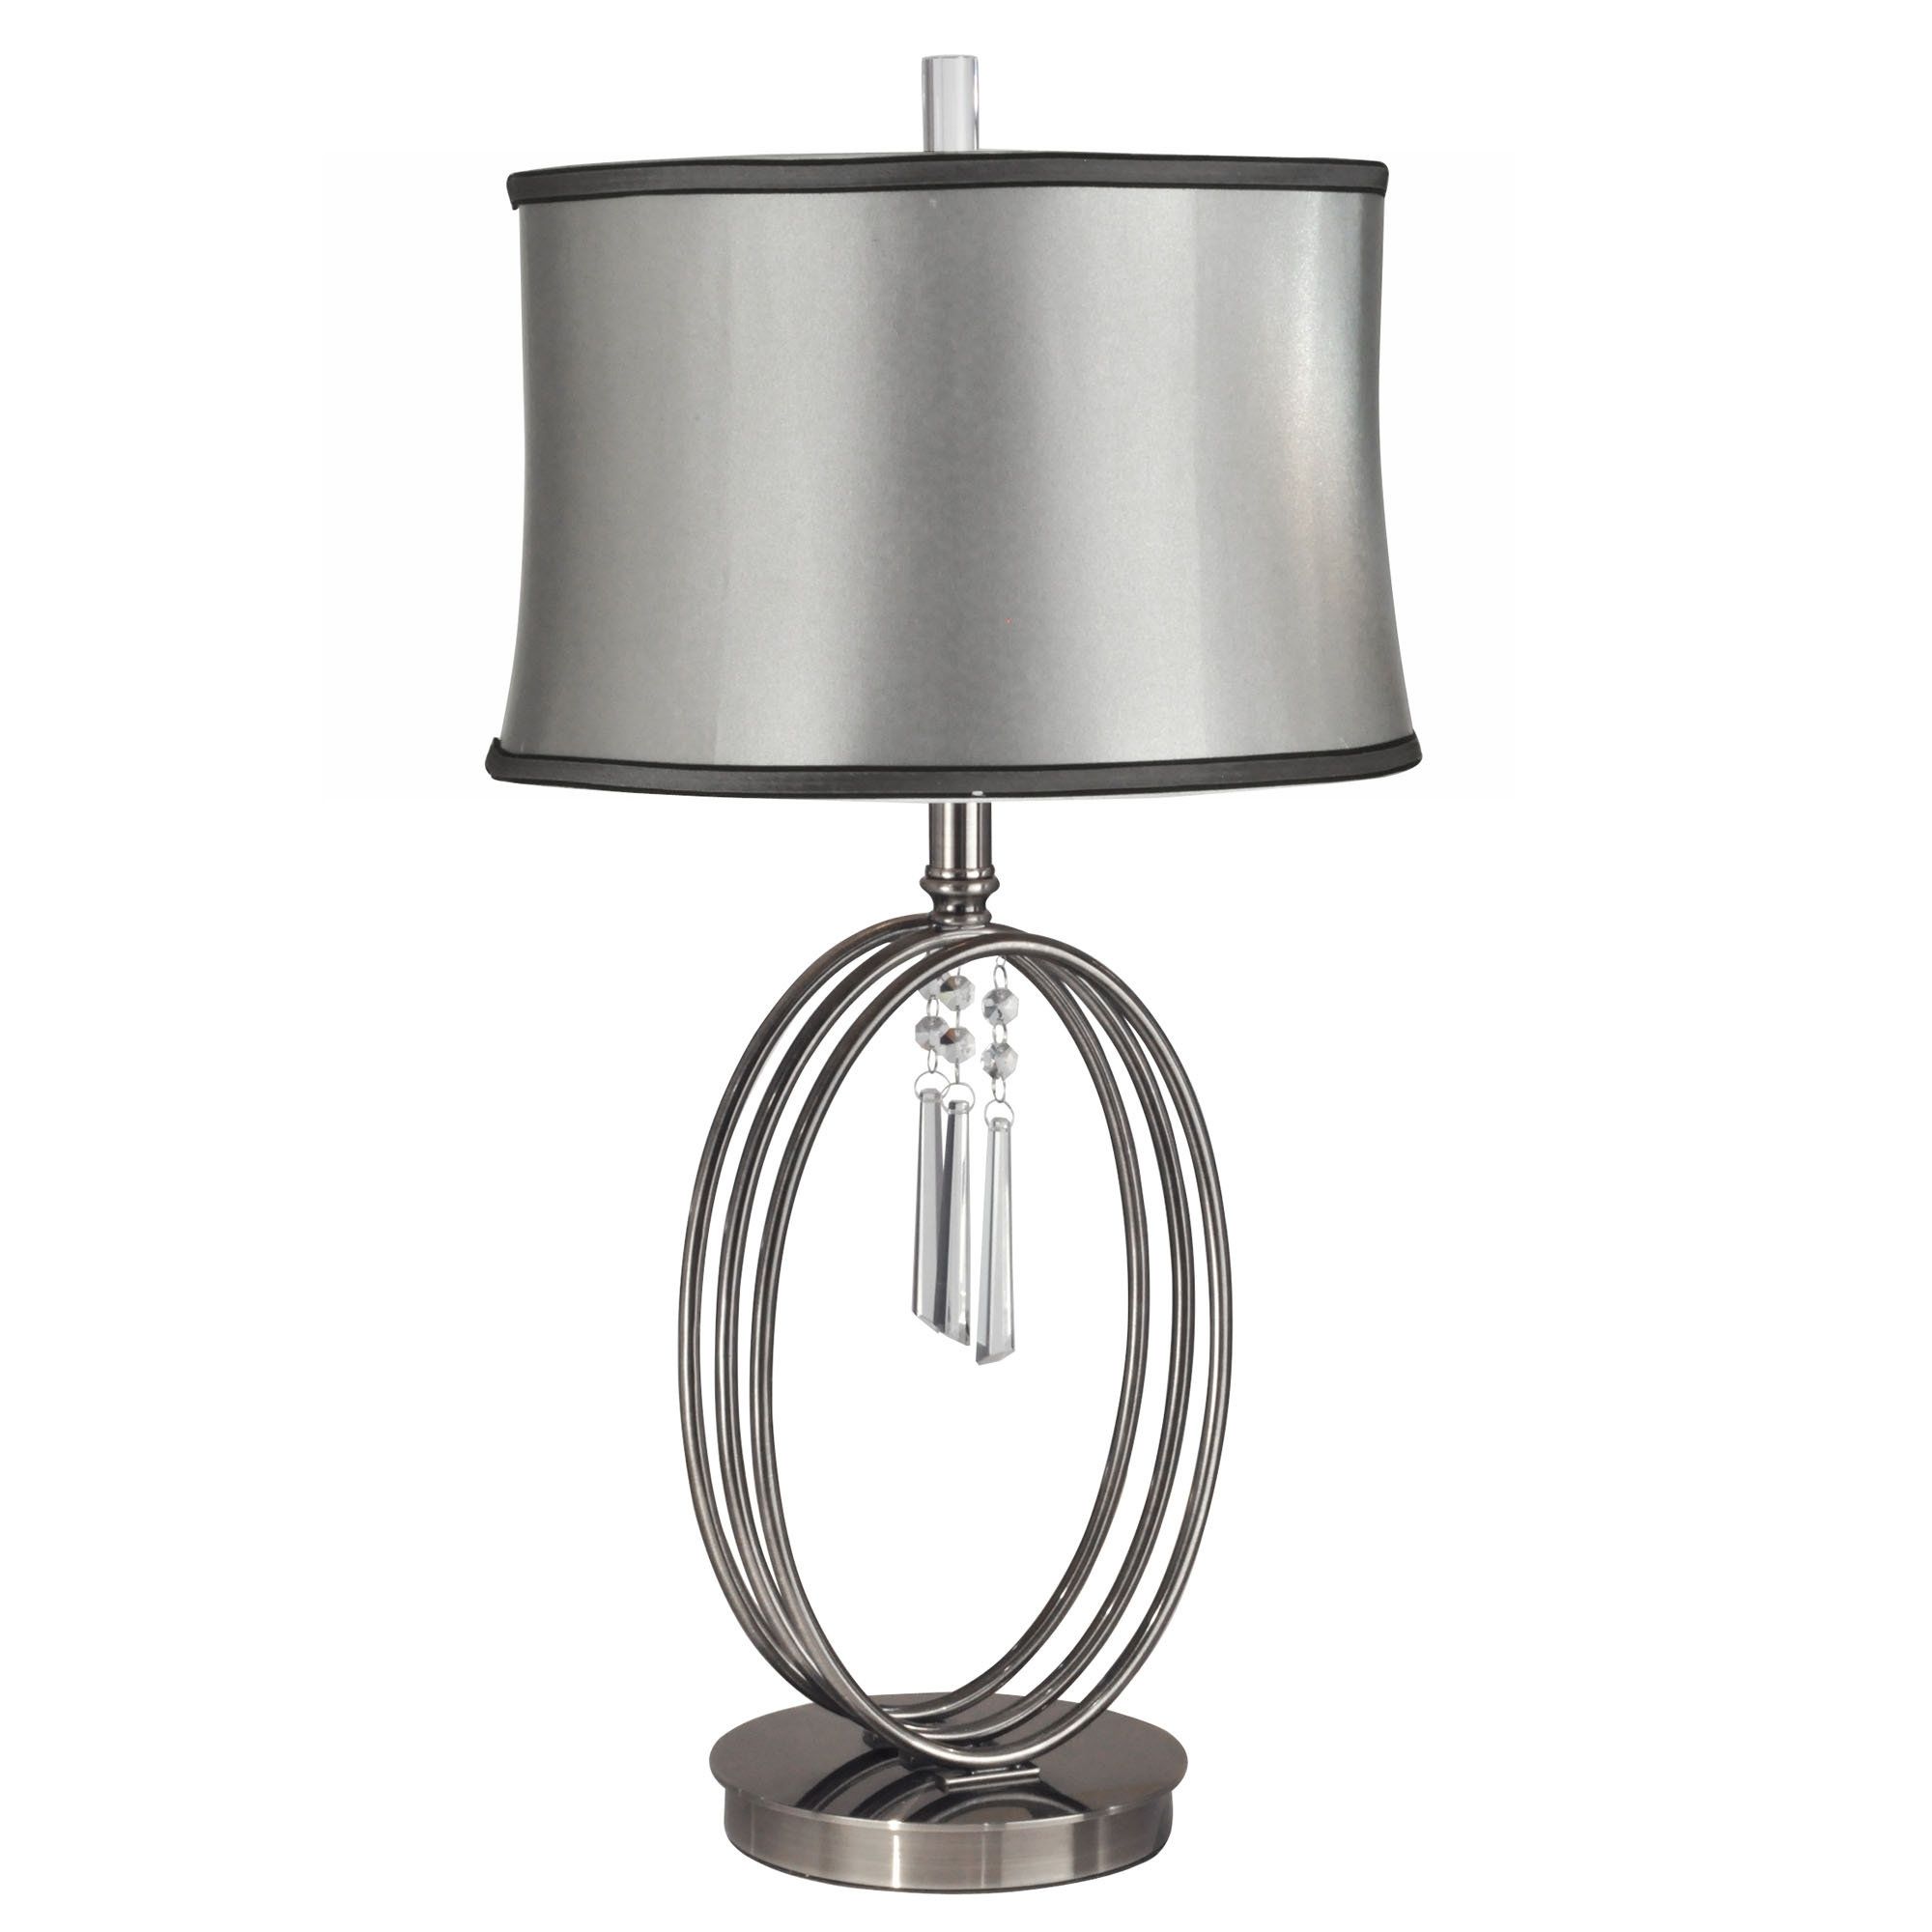 Best And Newest Uncategorized : End Table Lamps For Bedroom Modern Floor Lamp Regarding Primitive Living Room Table Lamps (View 8 of 20)